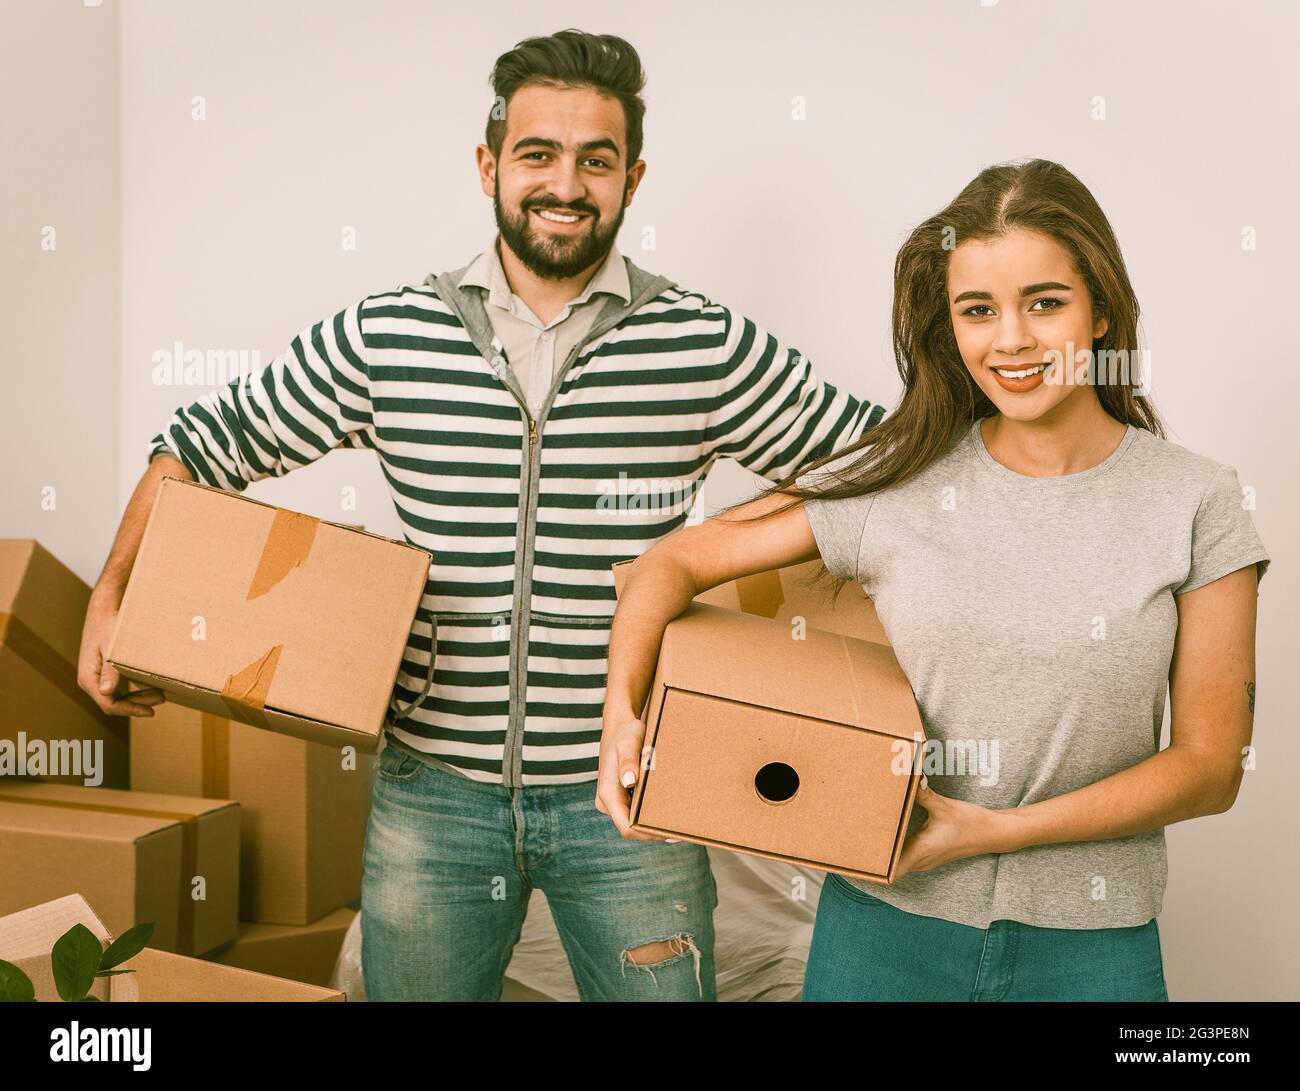 Young couple smiling and holding boxes while standing among unpacked boxes Stock Photo